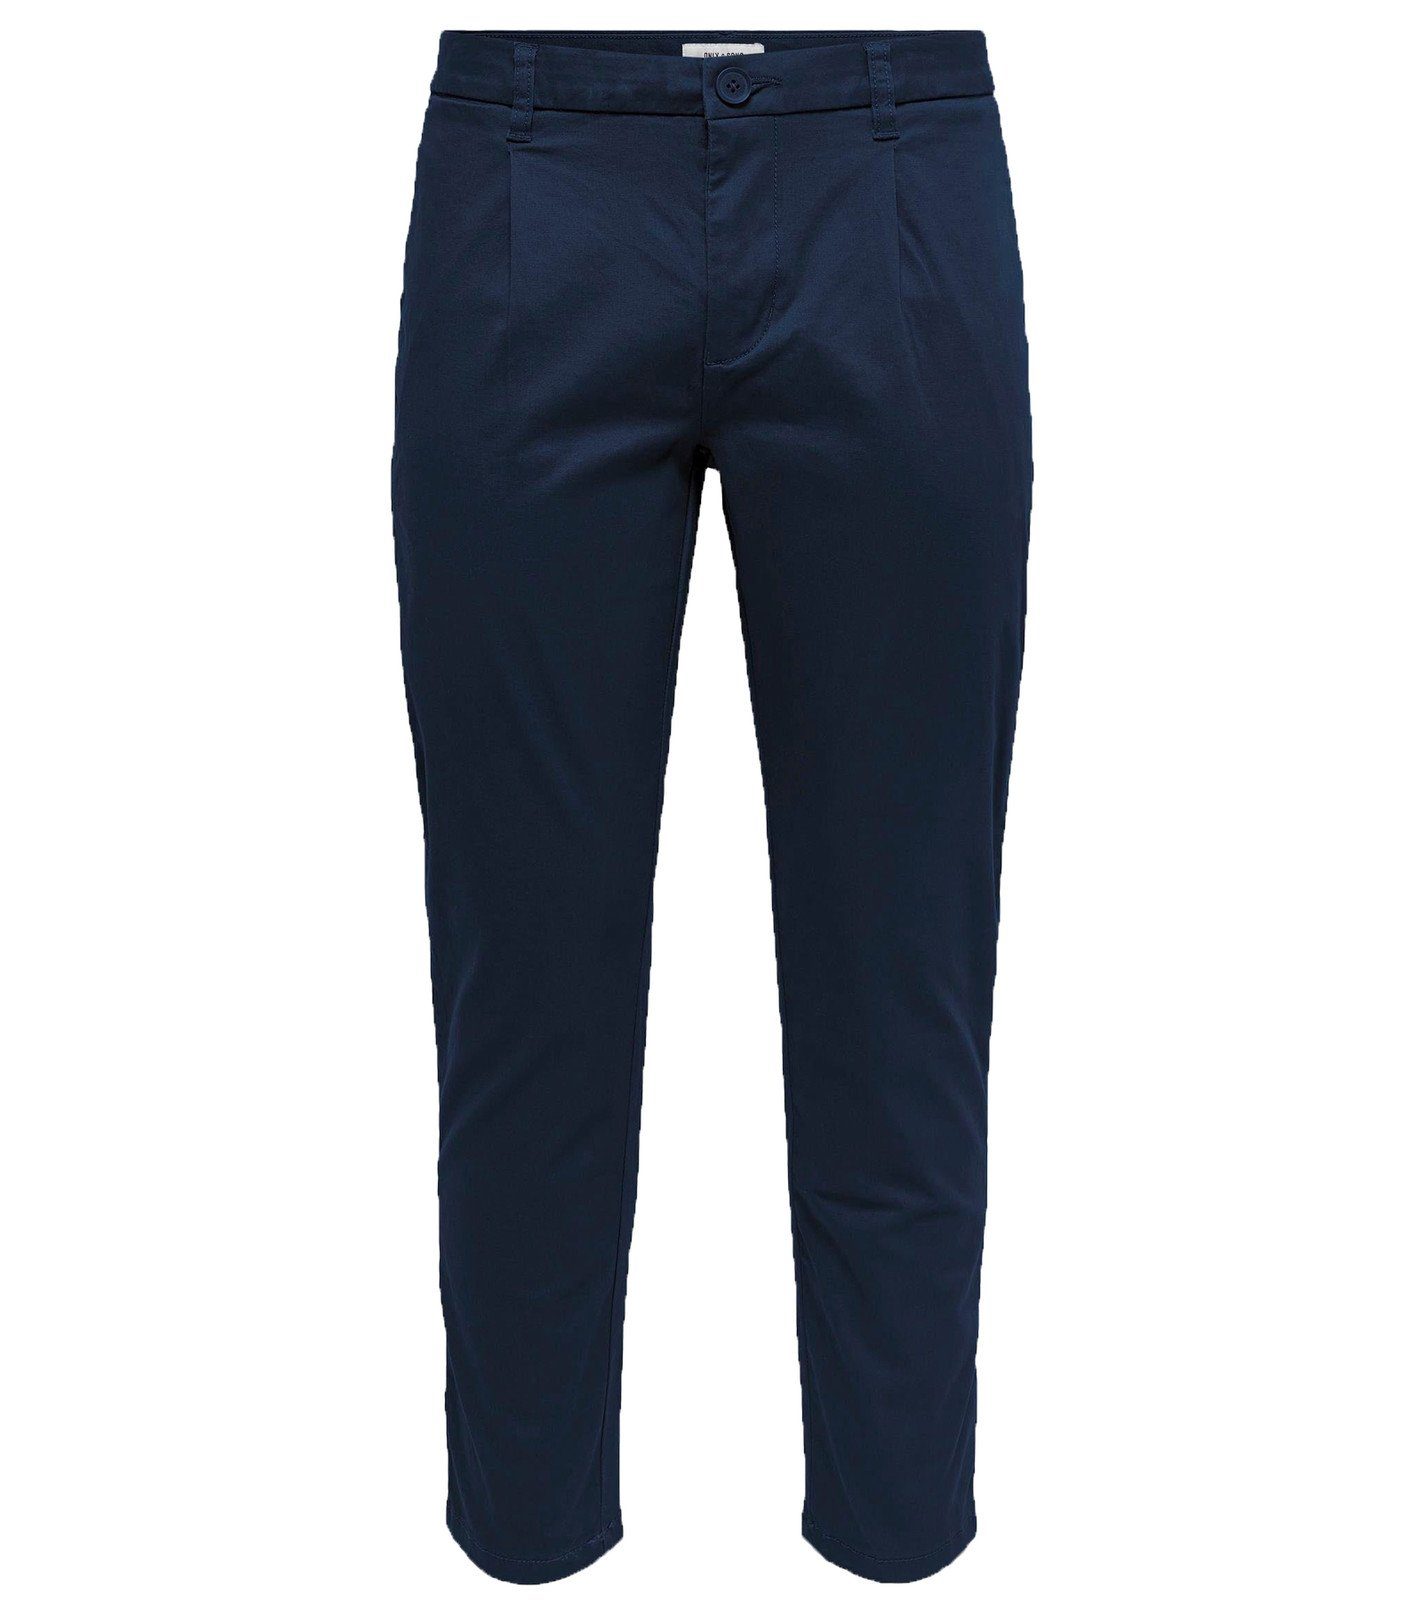 ONLY & SONS Stoffhose »ONLY & SONS Herren Stoff-Hose Chino-Hose Cam Chino  Business-Hose Dunkel-Blau« online kaufen | OTTO